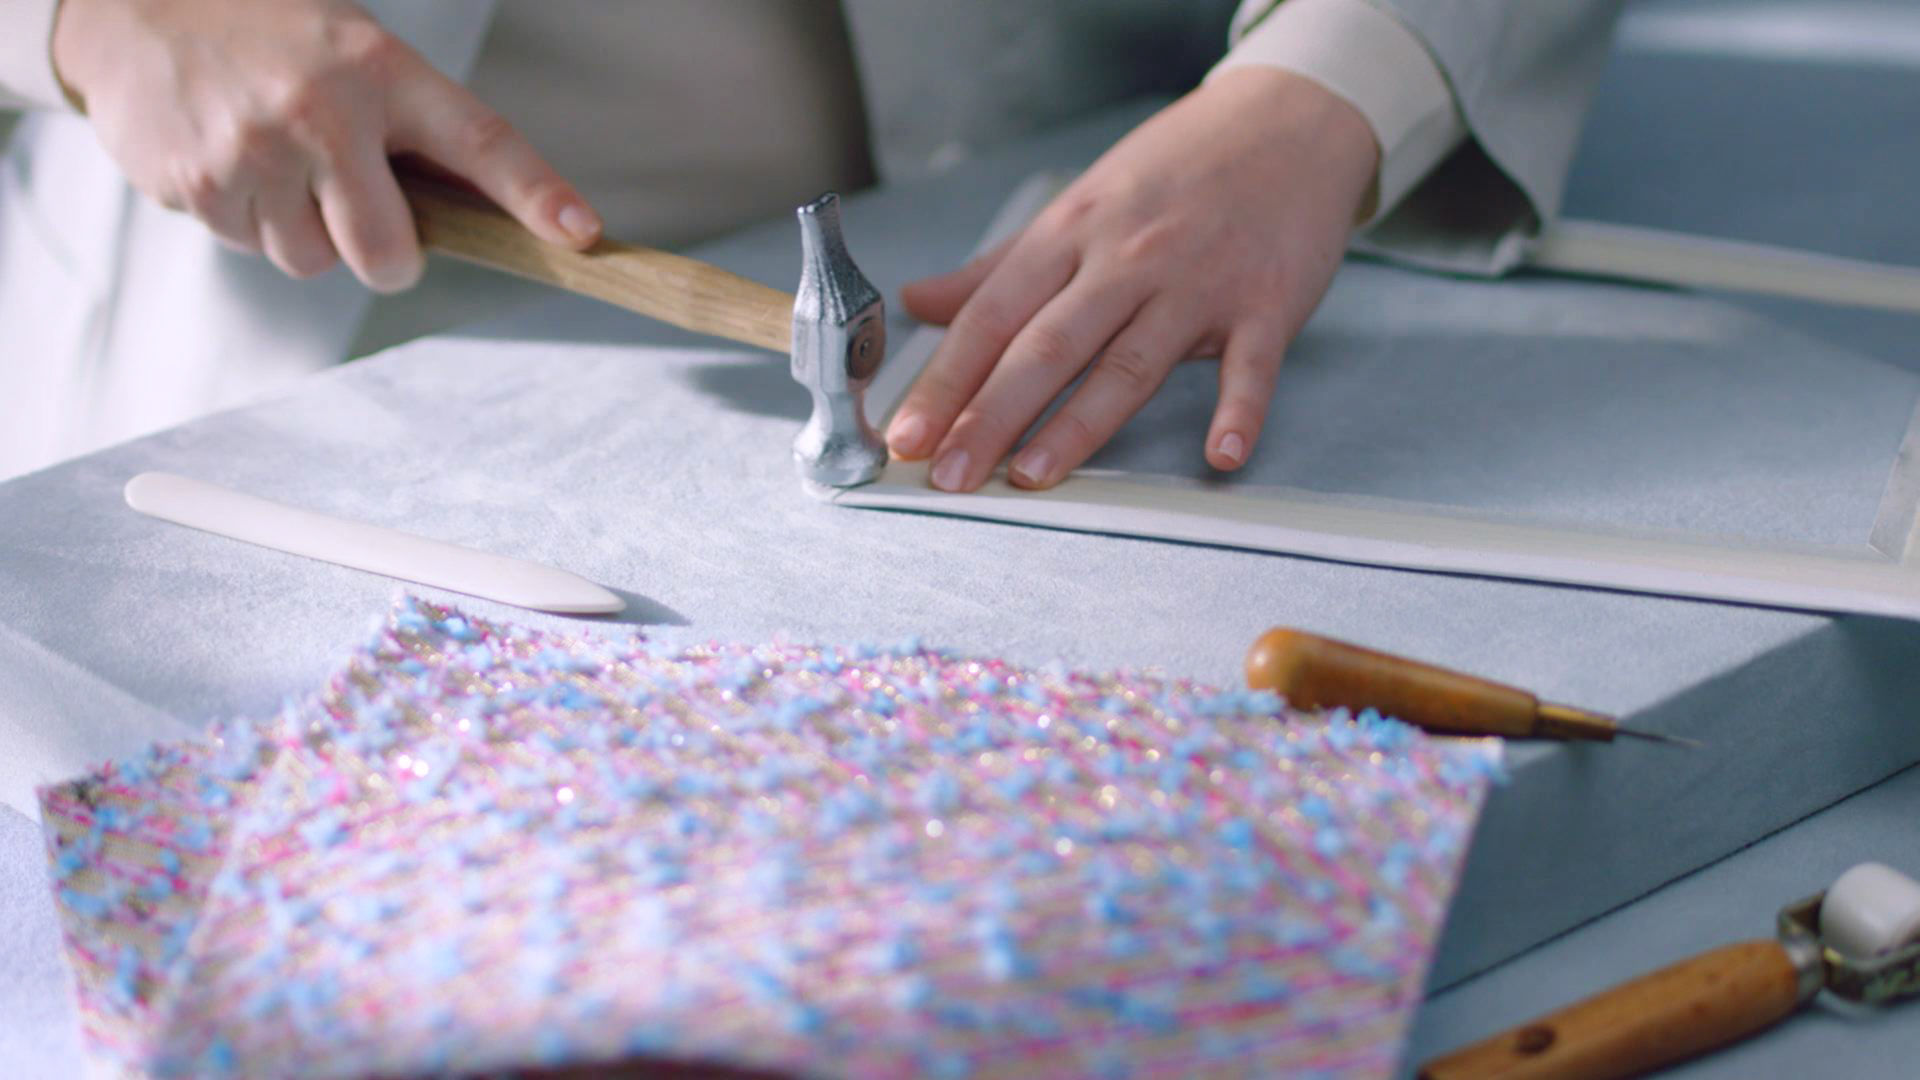 Watch: What goes into the making of your Chanel handbags